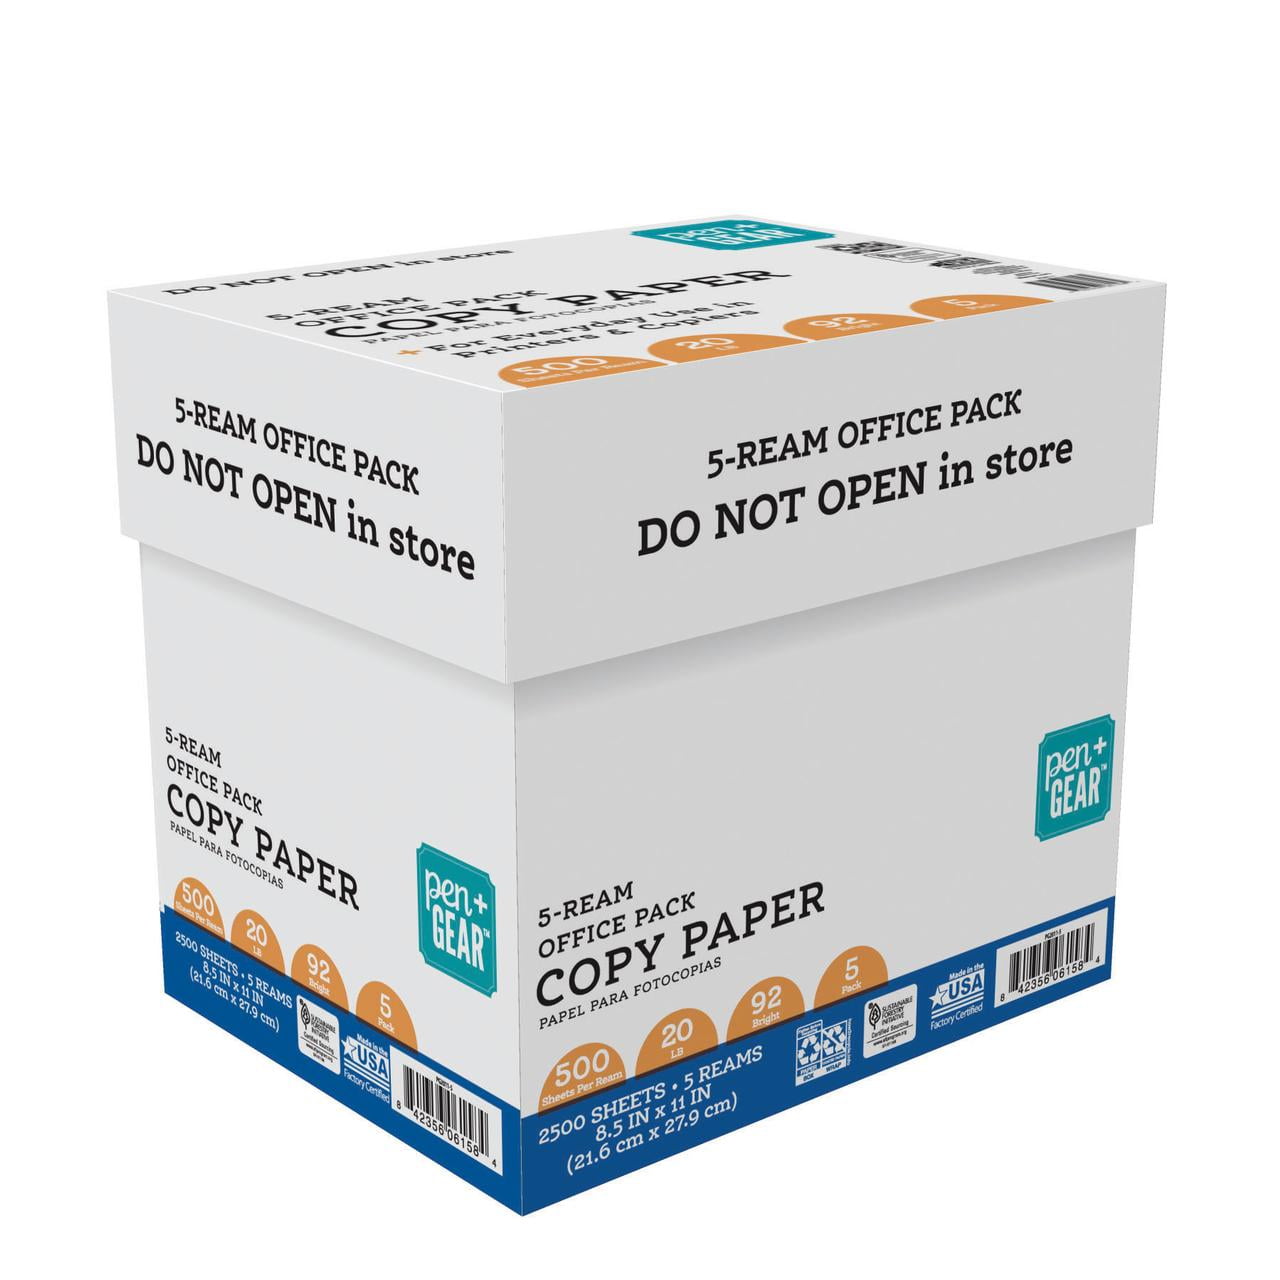 10 Ream Case of GP Copy & Print Paper, 8.5 x 11 Inches Letter size, 92 Bright White, 20 lb, Ream of 500 Sheets (998067R) by Georgia-Pacific